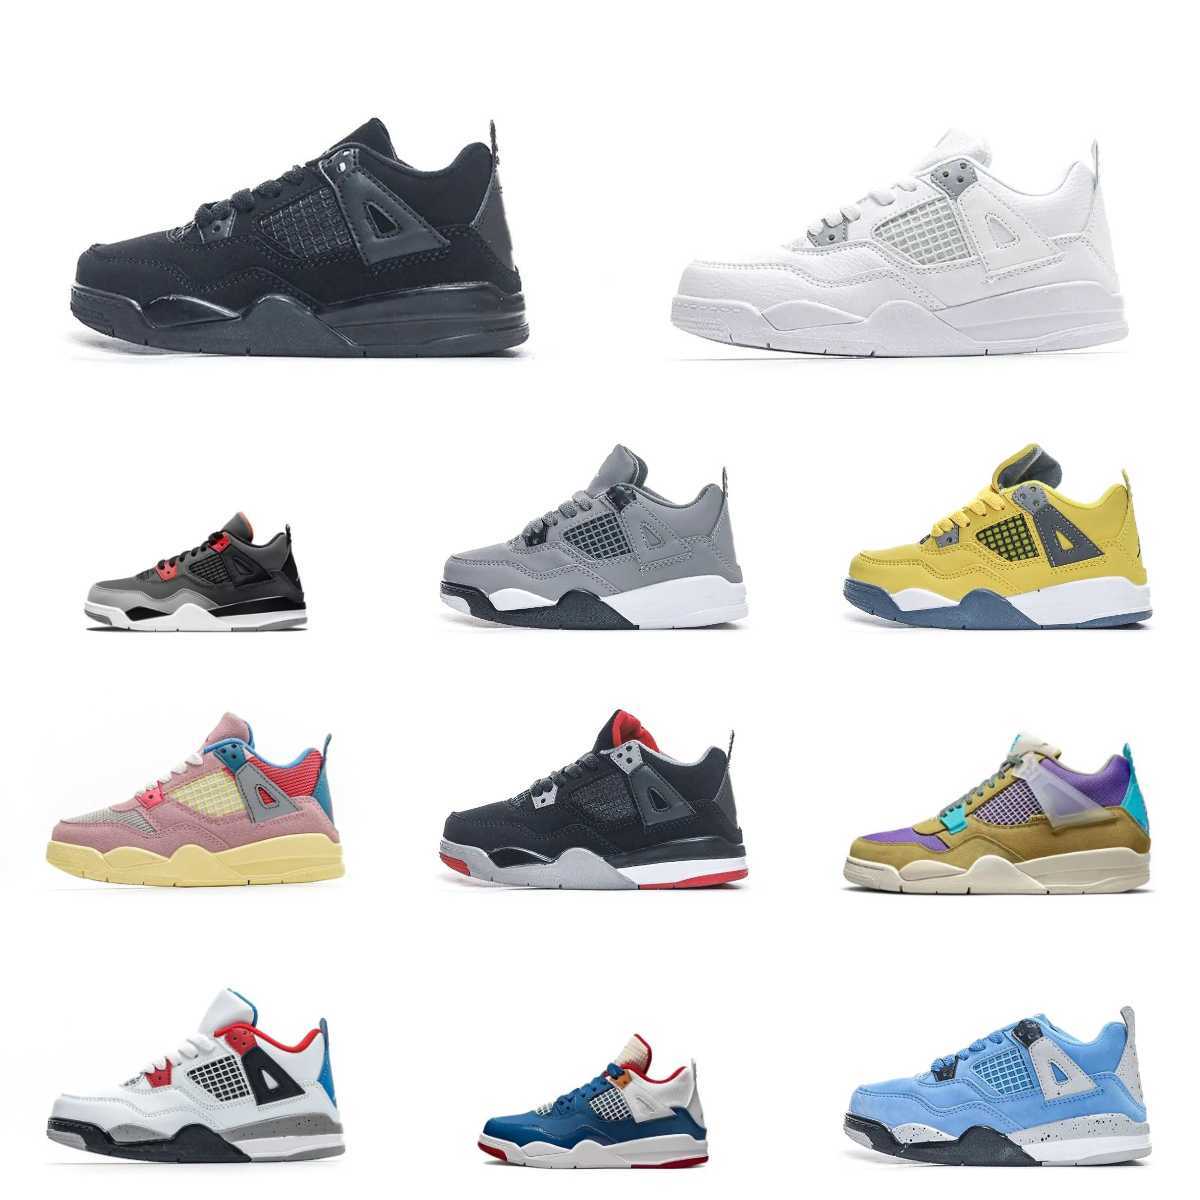 

Jumpman 4S Baby Military Black Basketball Shoes Trainers Kids Union Fire Red 4 Pure Money Black Cat Pale Citron GUAVA ICE Desert Moss Red Thunder Infrared Sneakers, Please contact us